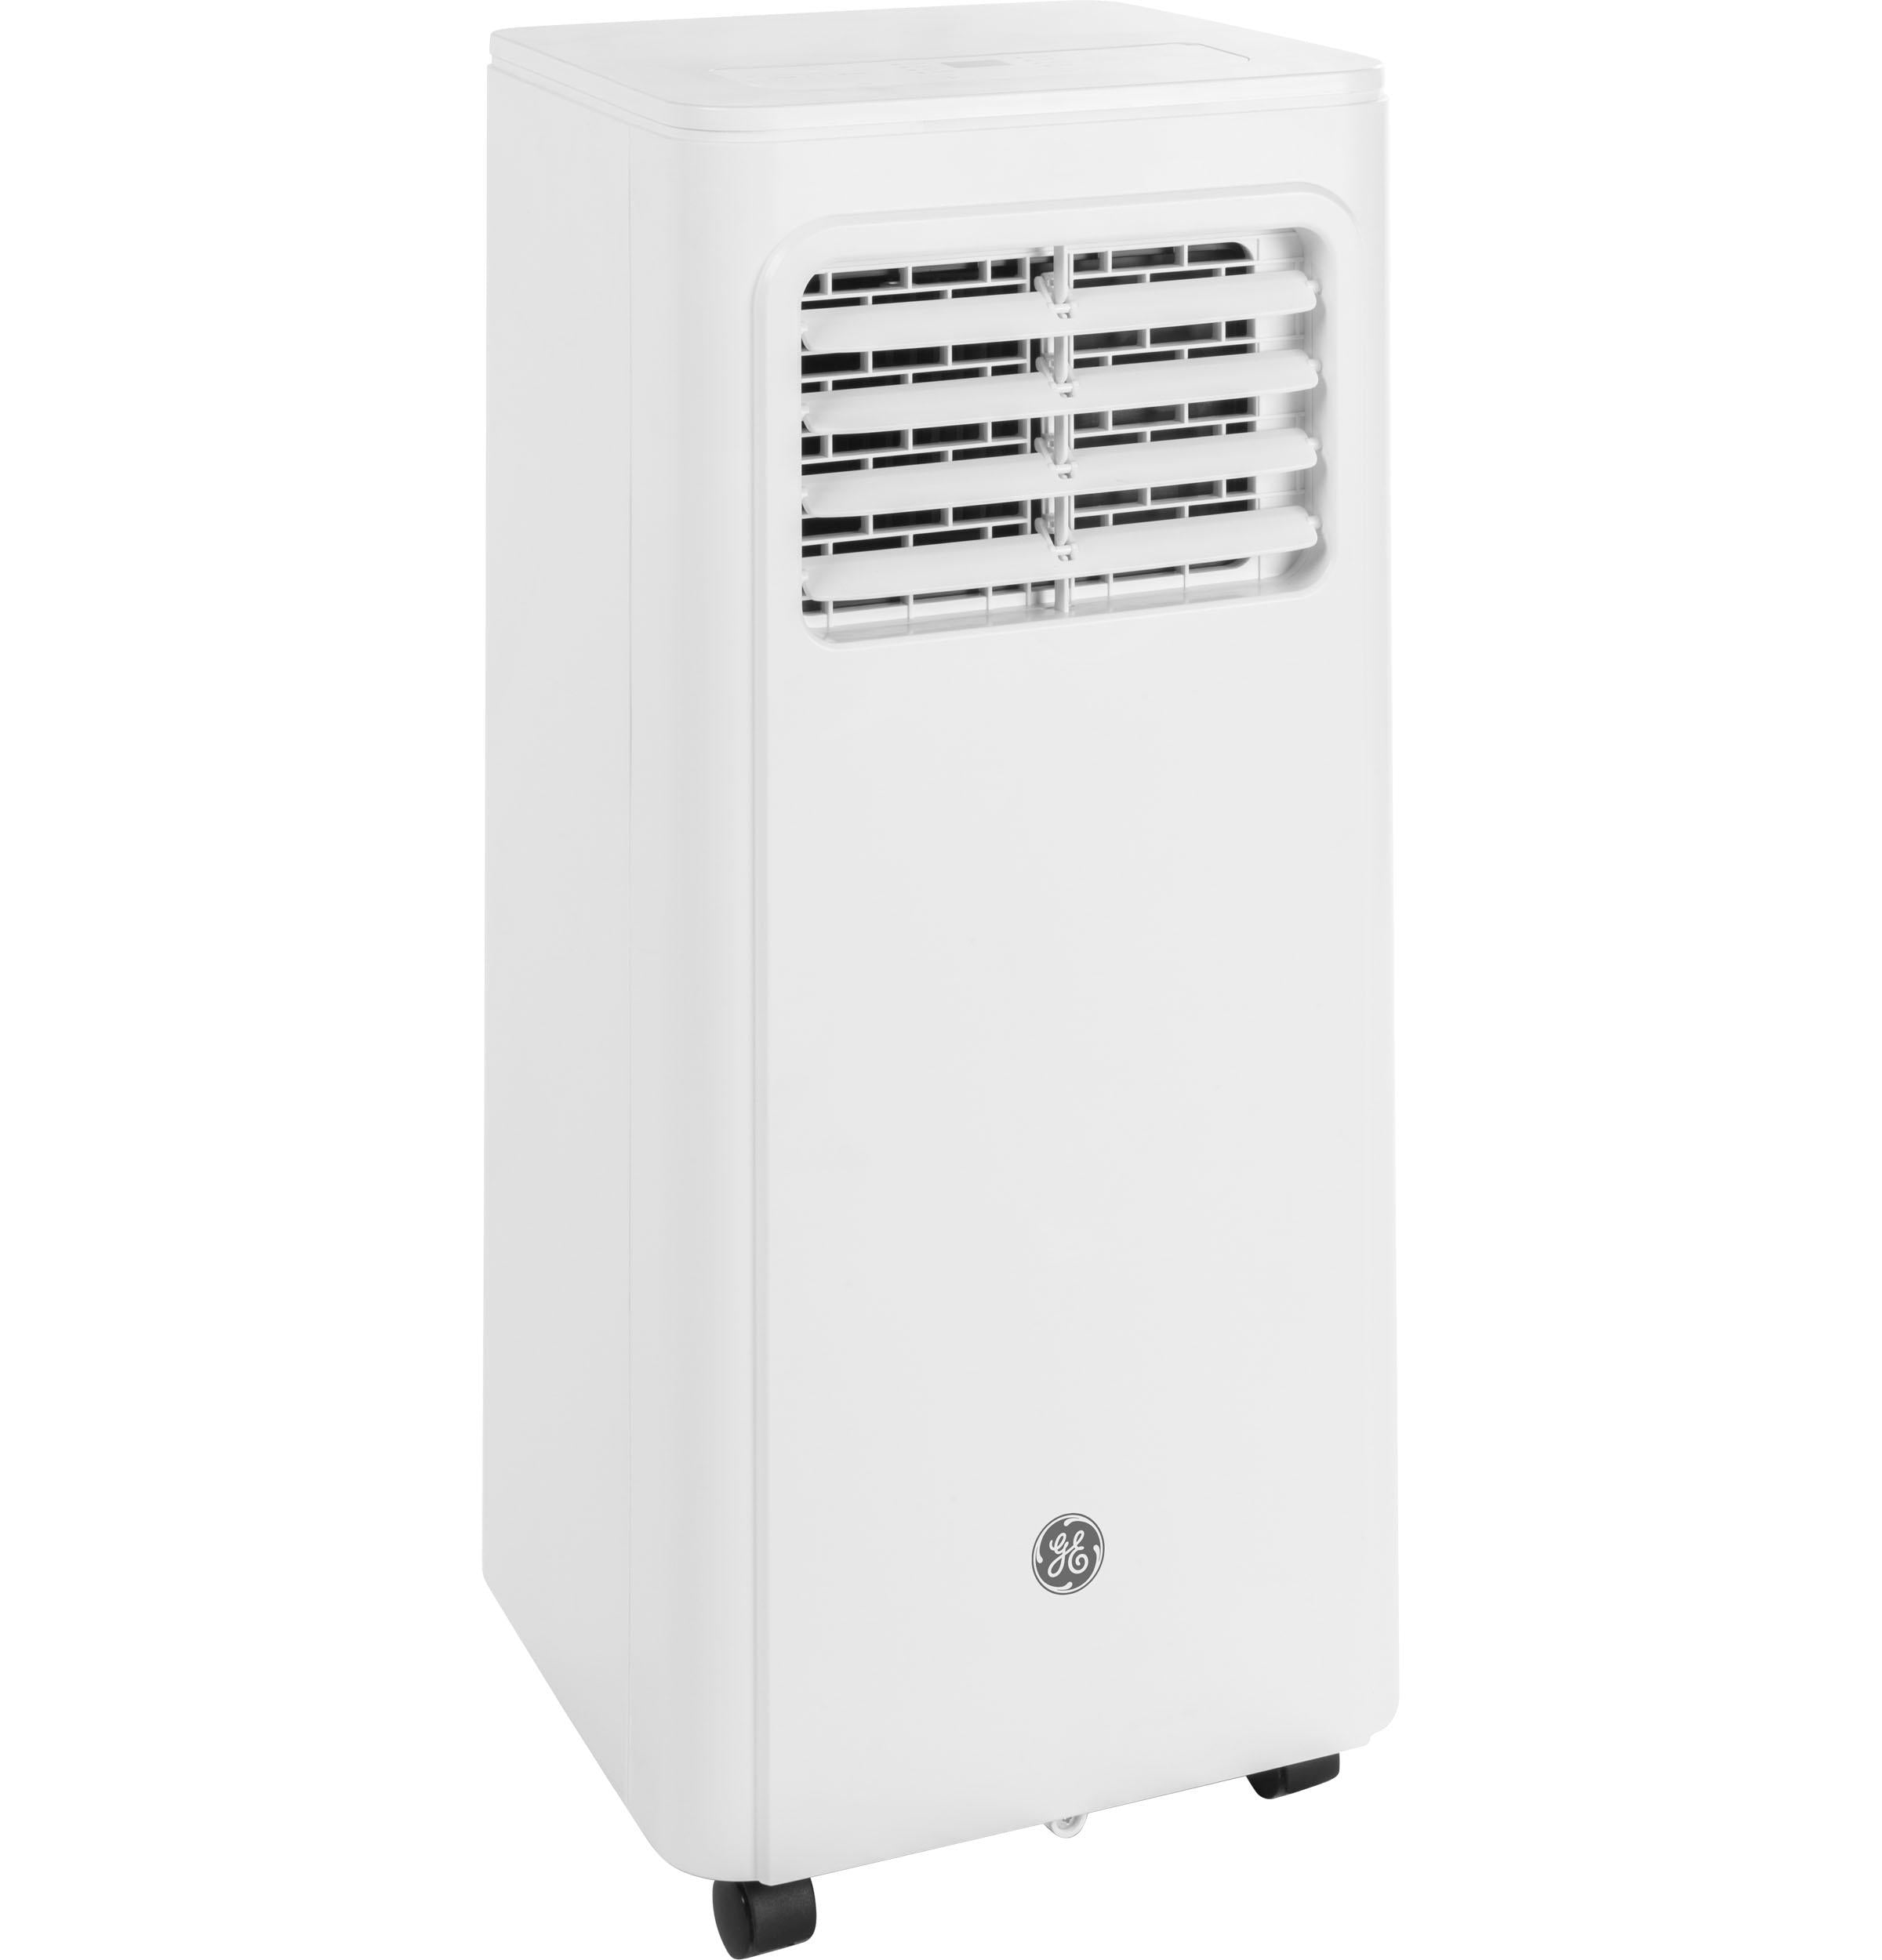 GE® 9,000 BTU Portable Air Conditioner for Small Rooms up to 250 sq ft. (6,250 BTU SACC)